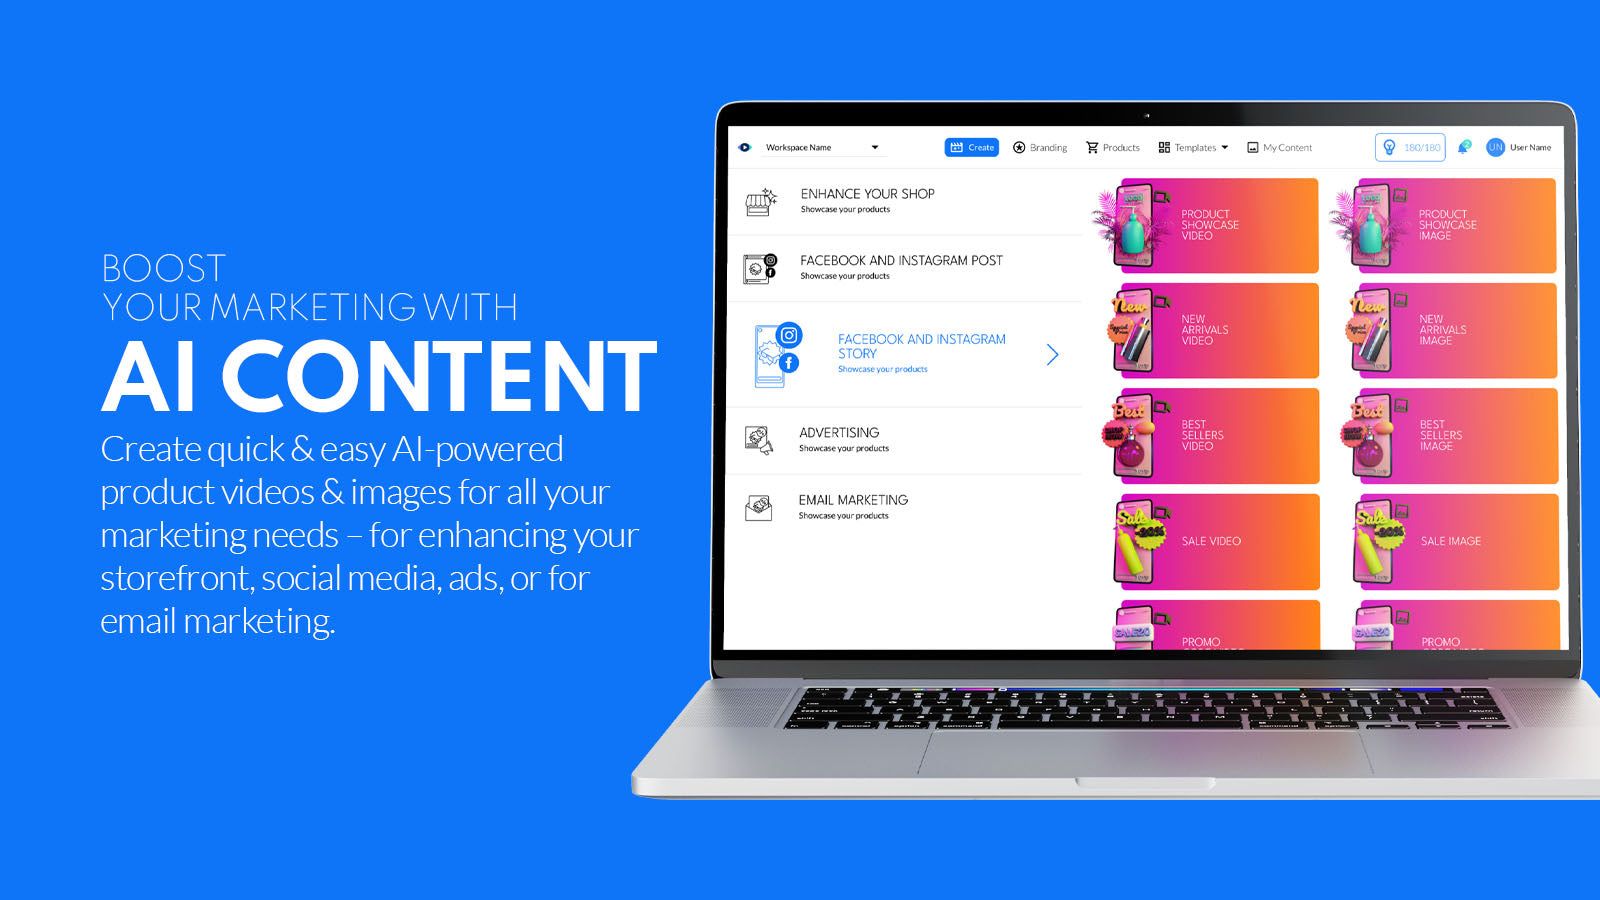 Create quick & easy AI-powered content to boost your marketing